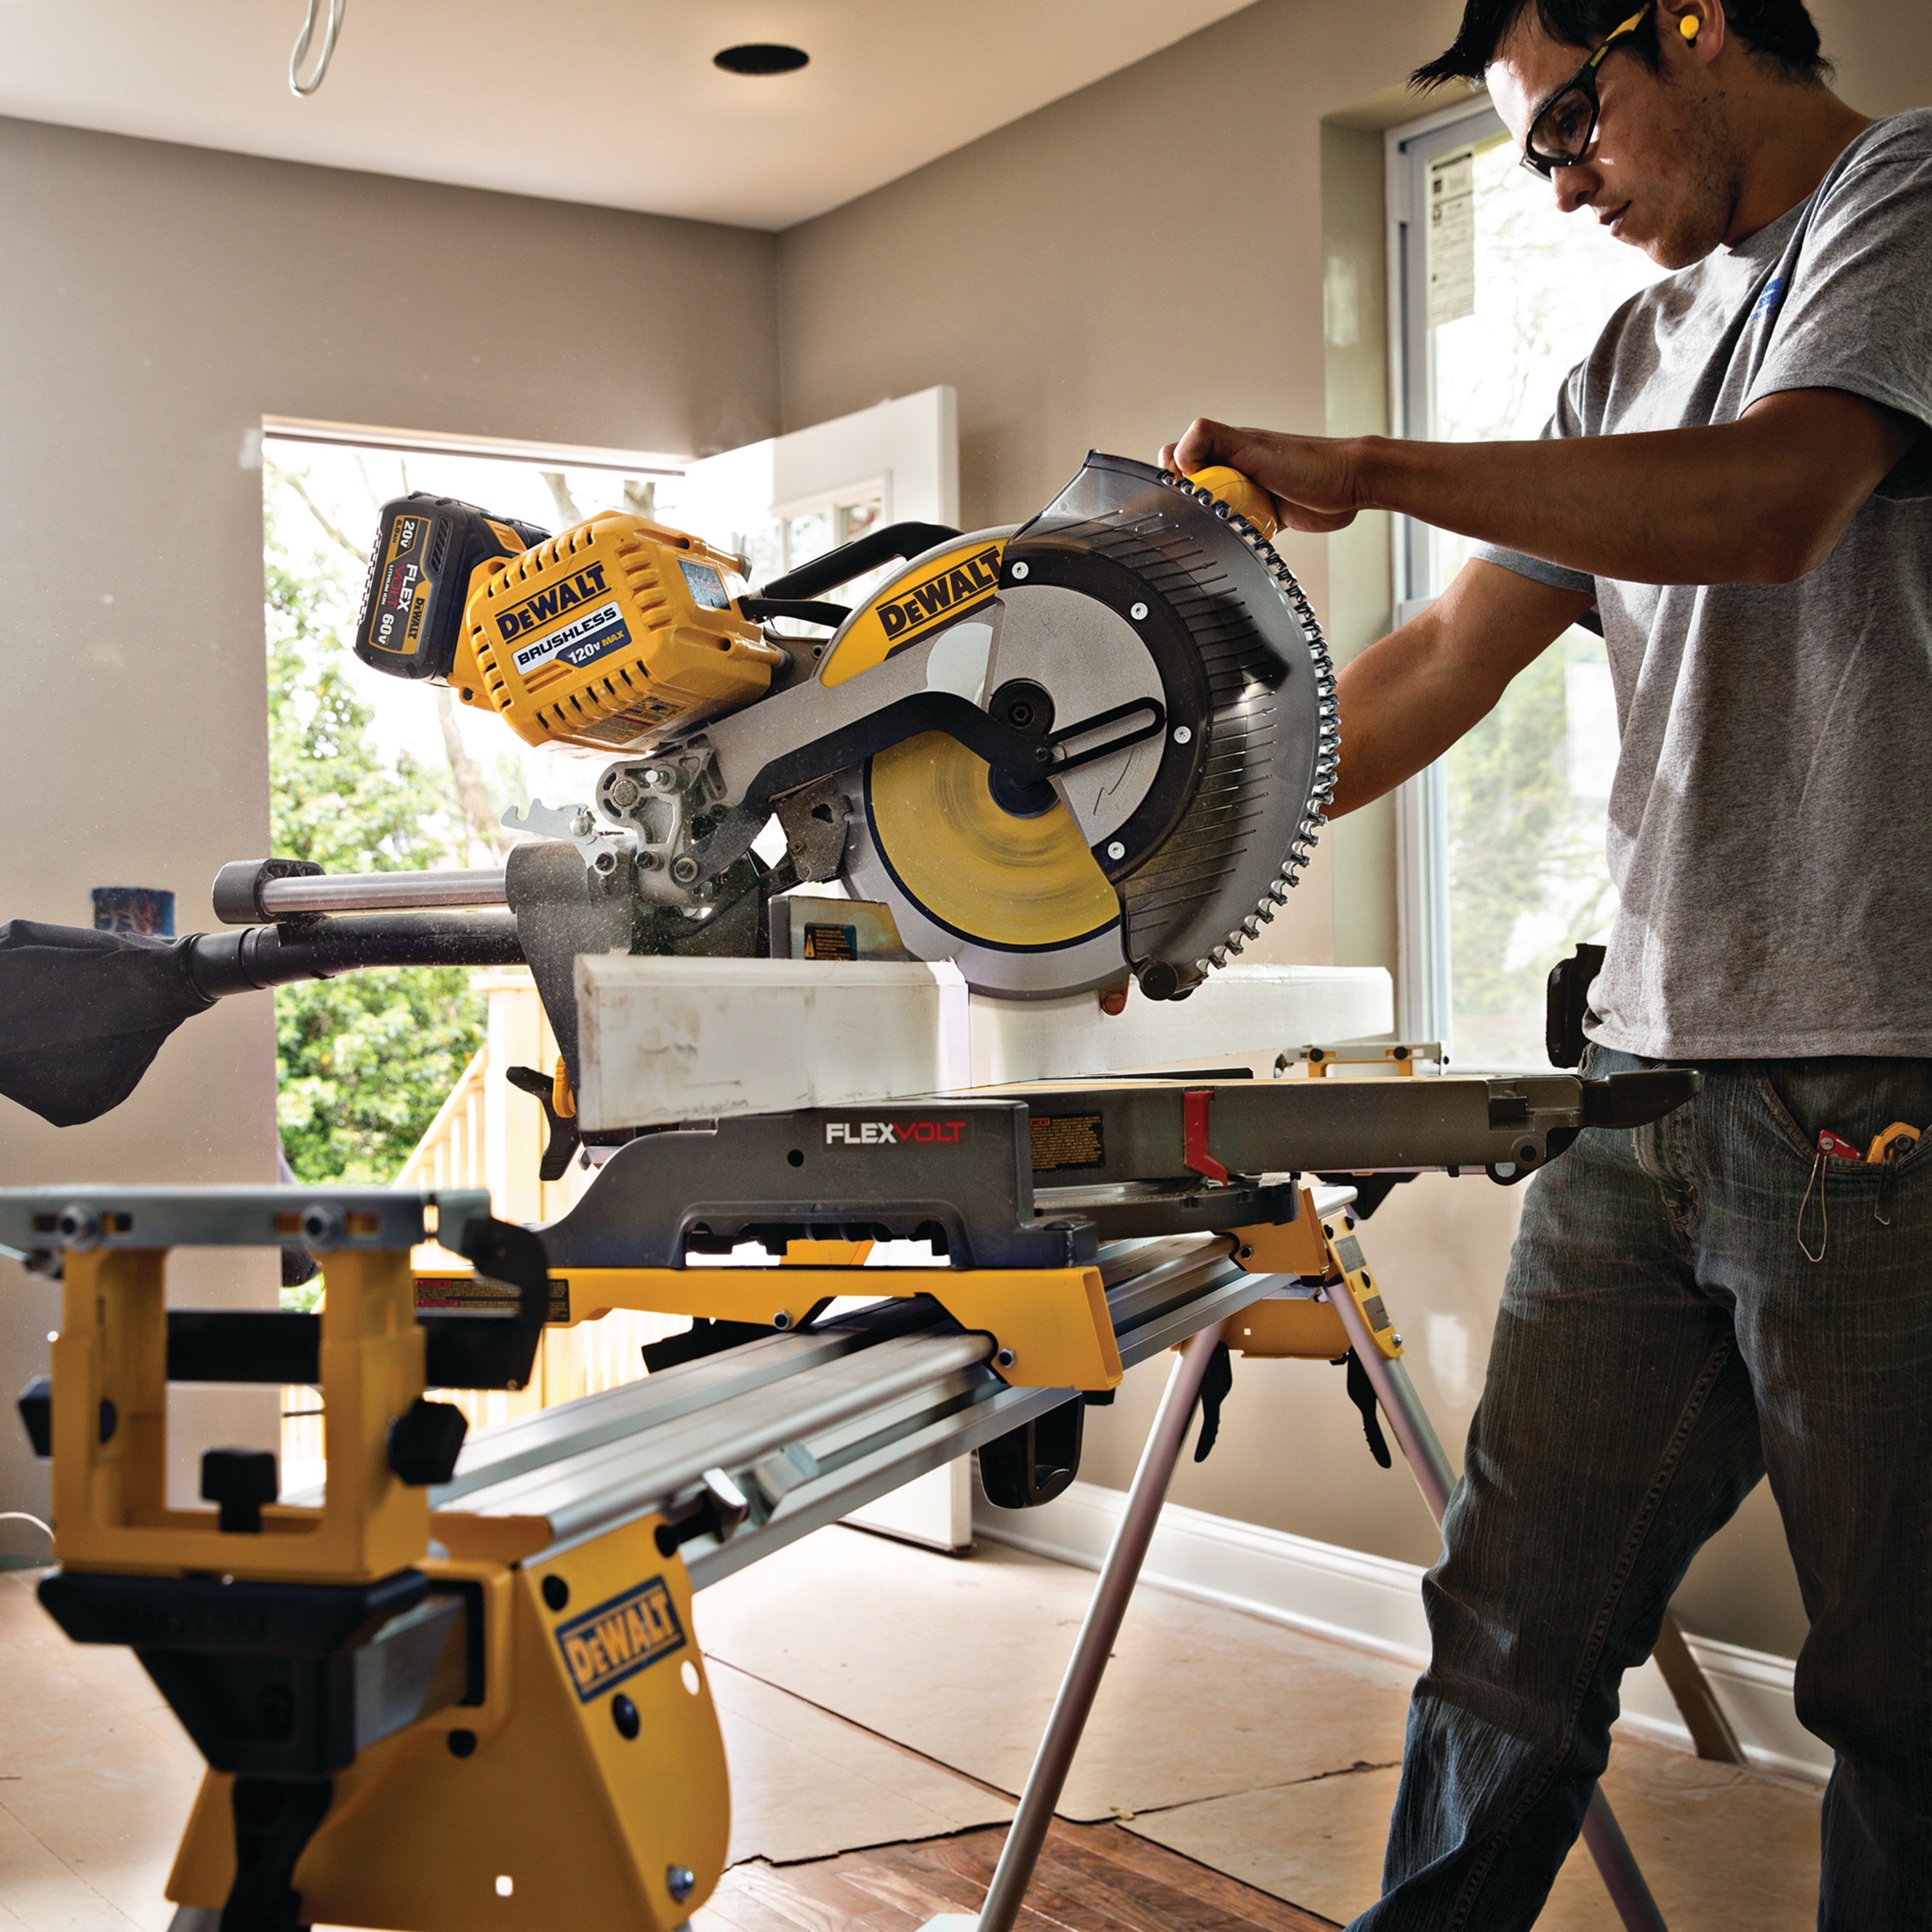 12 inch Miter saw blade being used by a person.